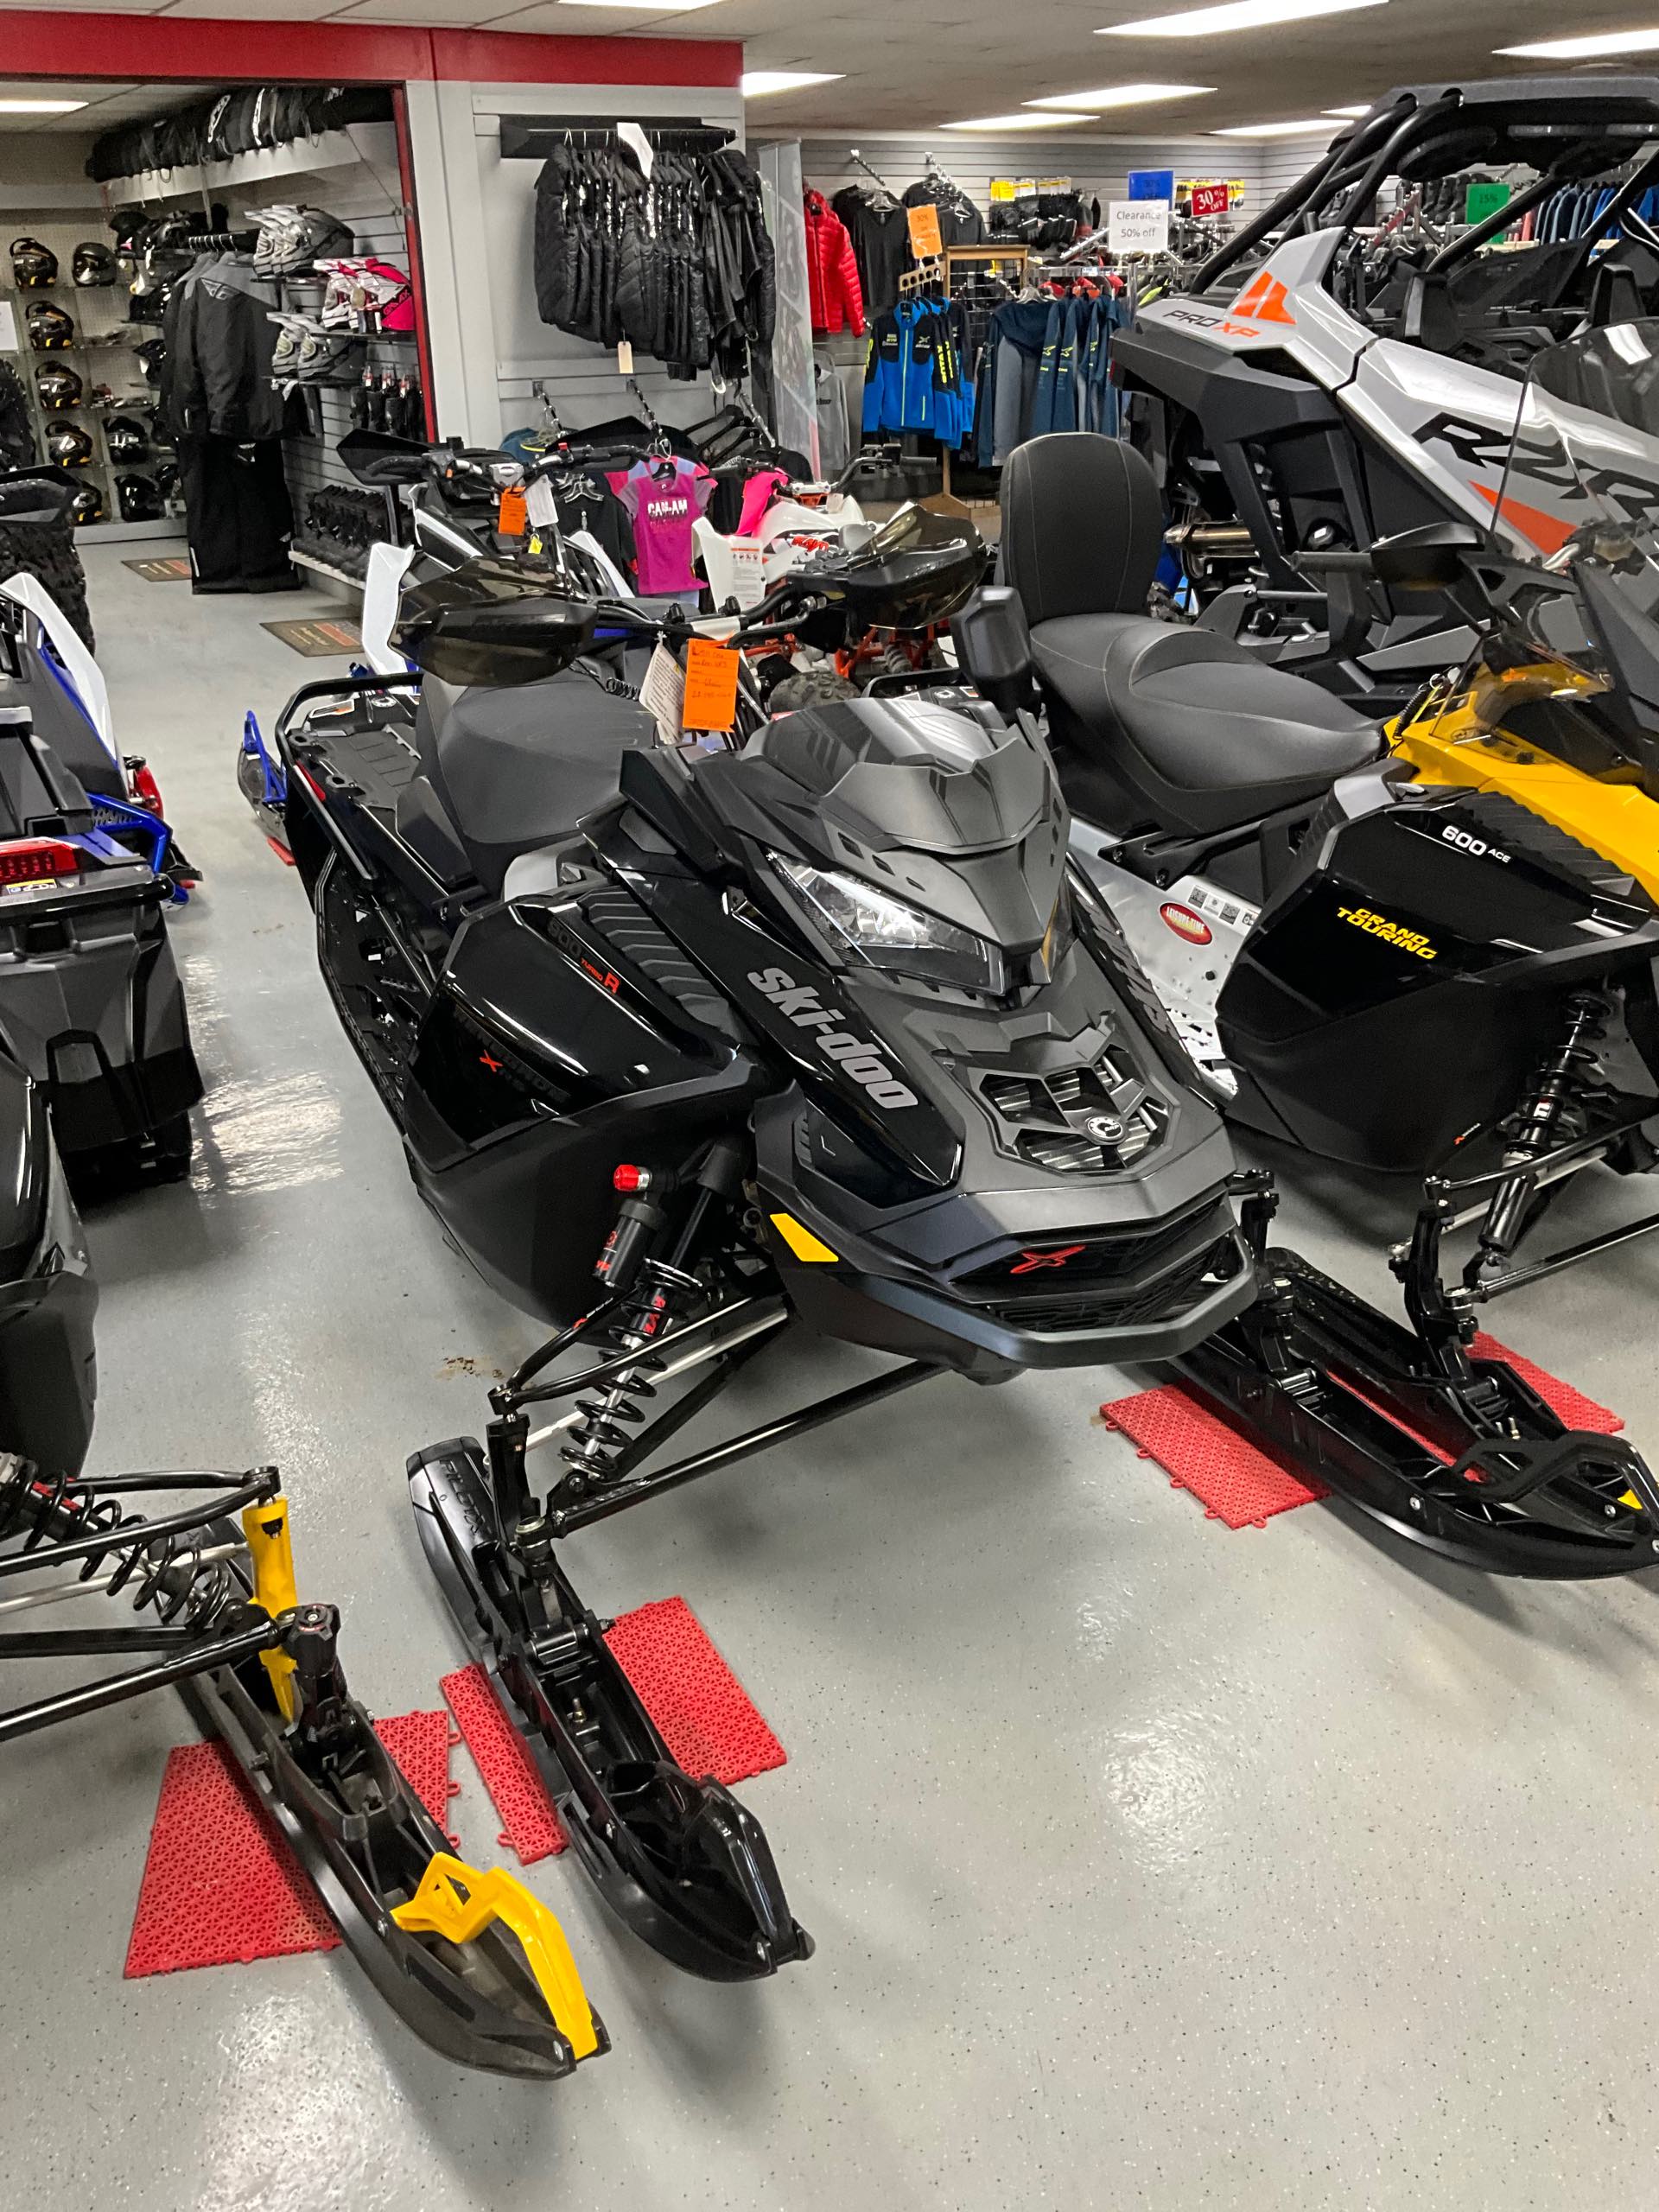 2023 Ski-Doo Renegade X-RS 900 ACE Turbo R at Leisure Time Powersports of Corry